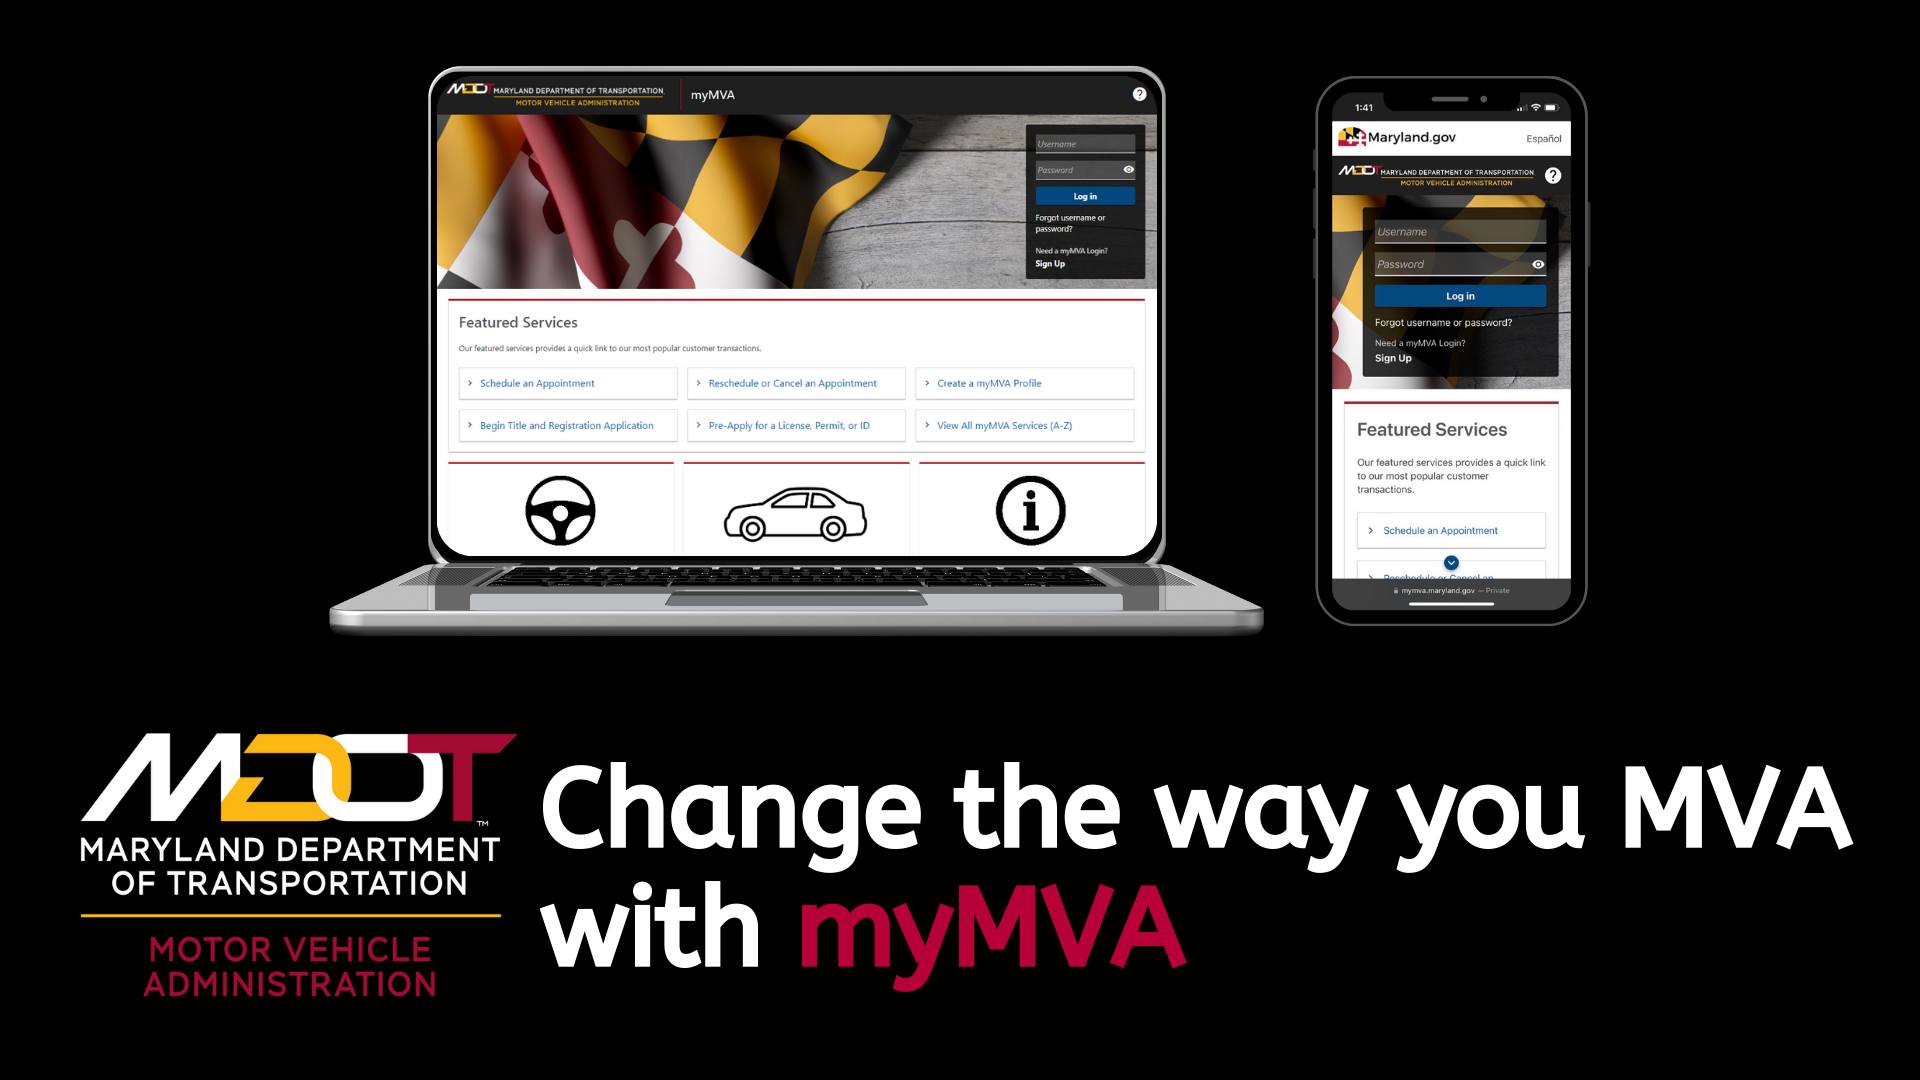 MD_MVA on X: Have you heard of myMVA? Complete more than 60